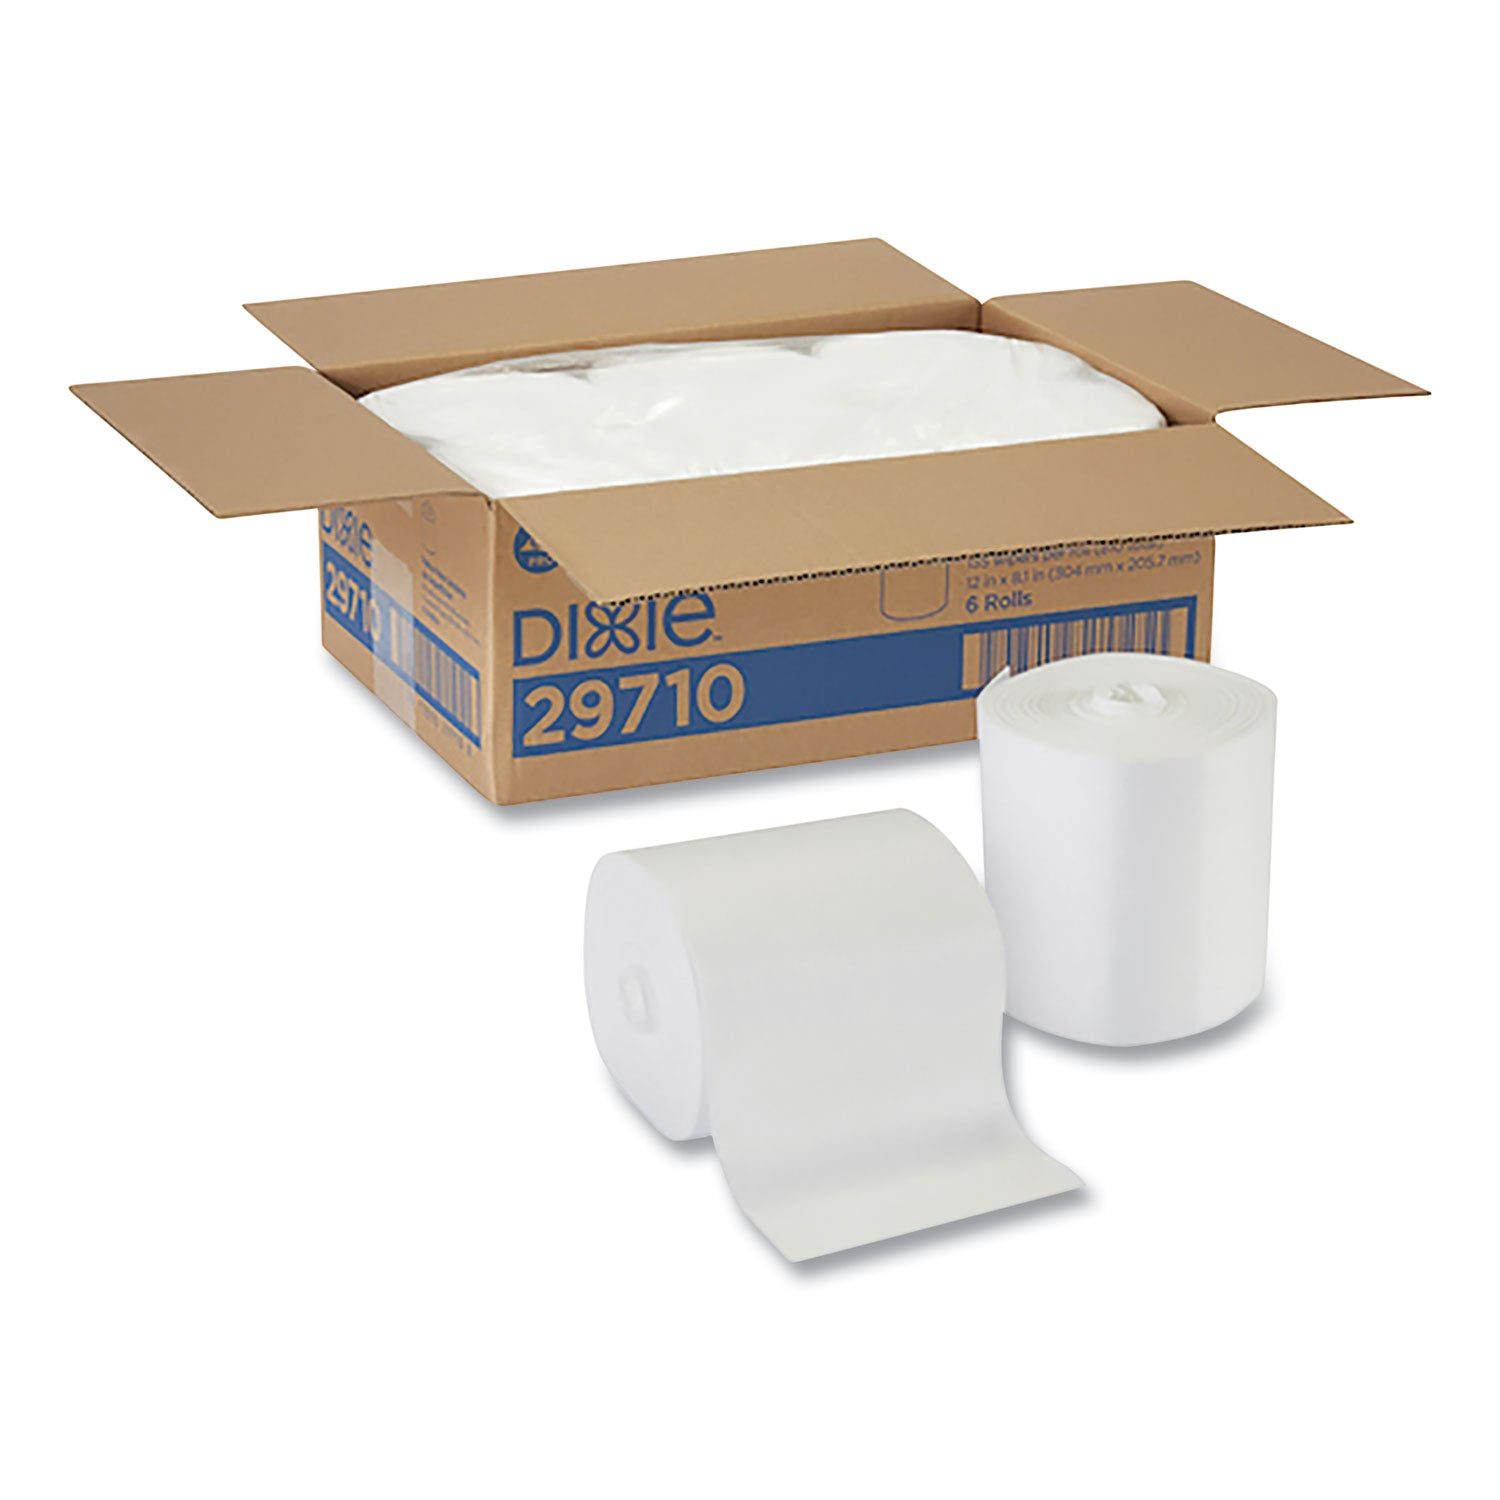 foodservice-surface-system-quat-compatible-disposable-wipe-refill-1-ply-81-x-12-white-135-sheets-roll-6-rolls-carton_dxe29710 - 1